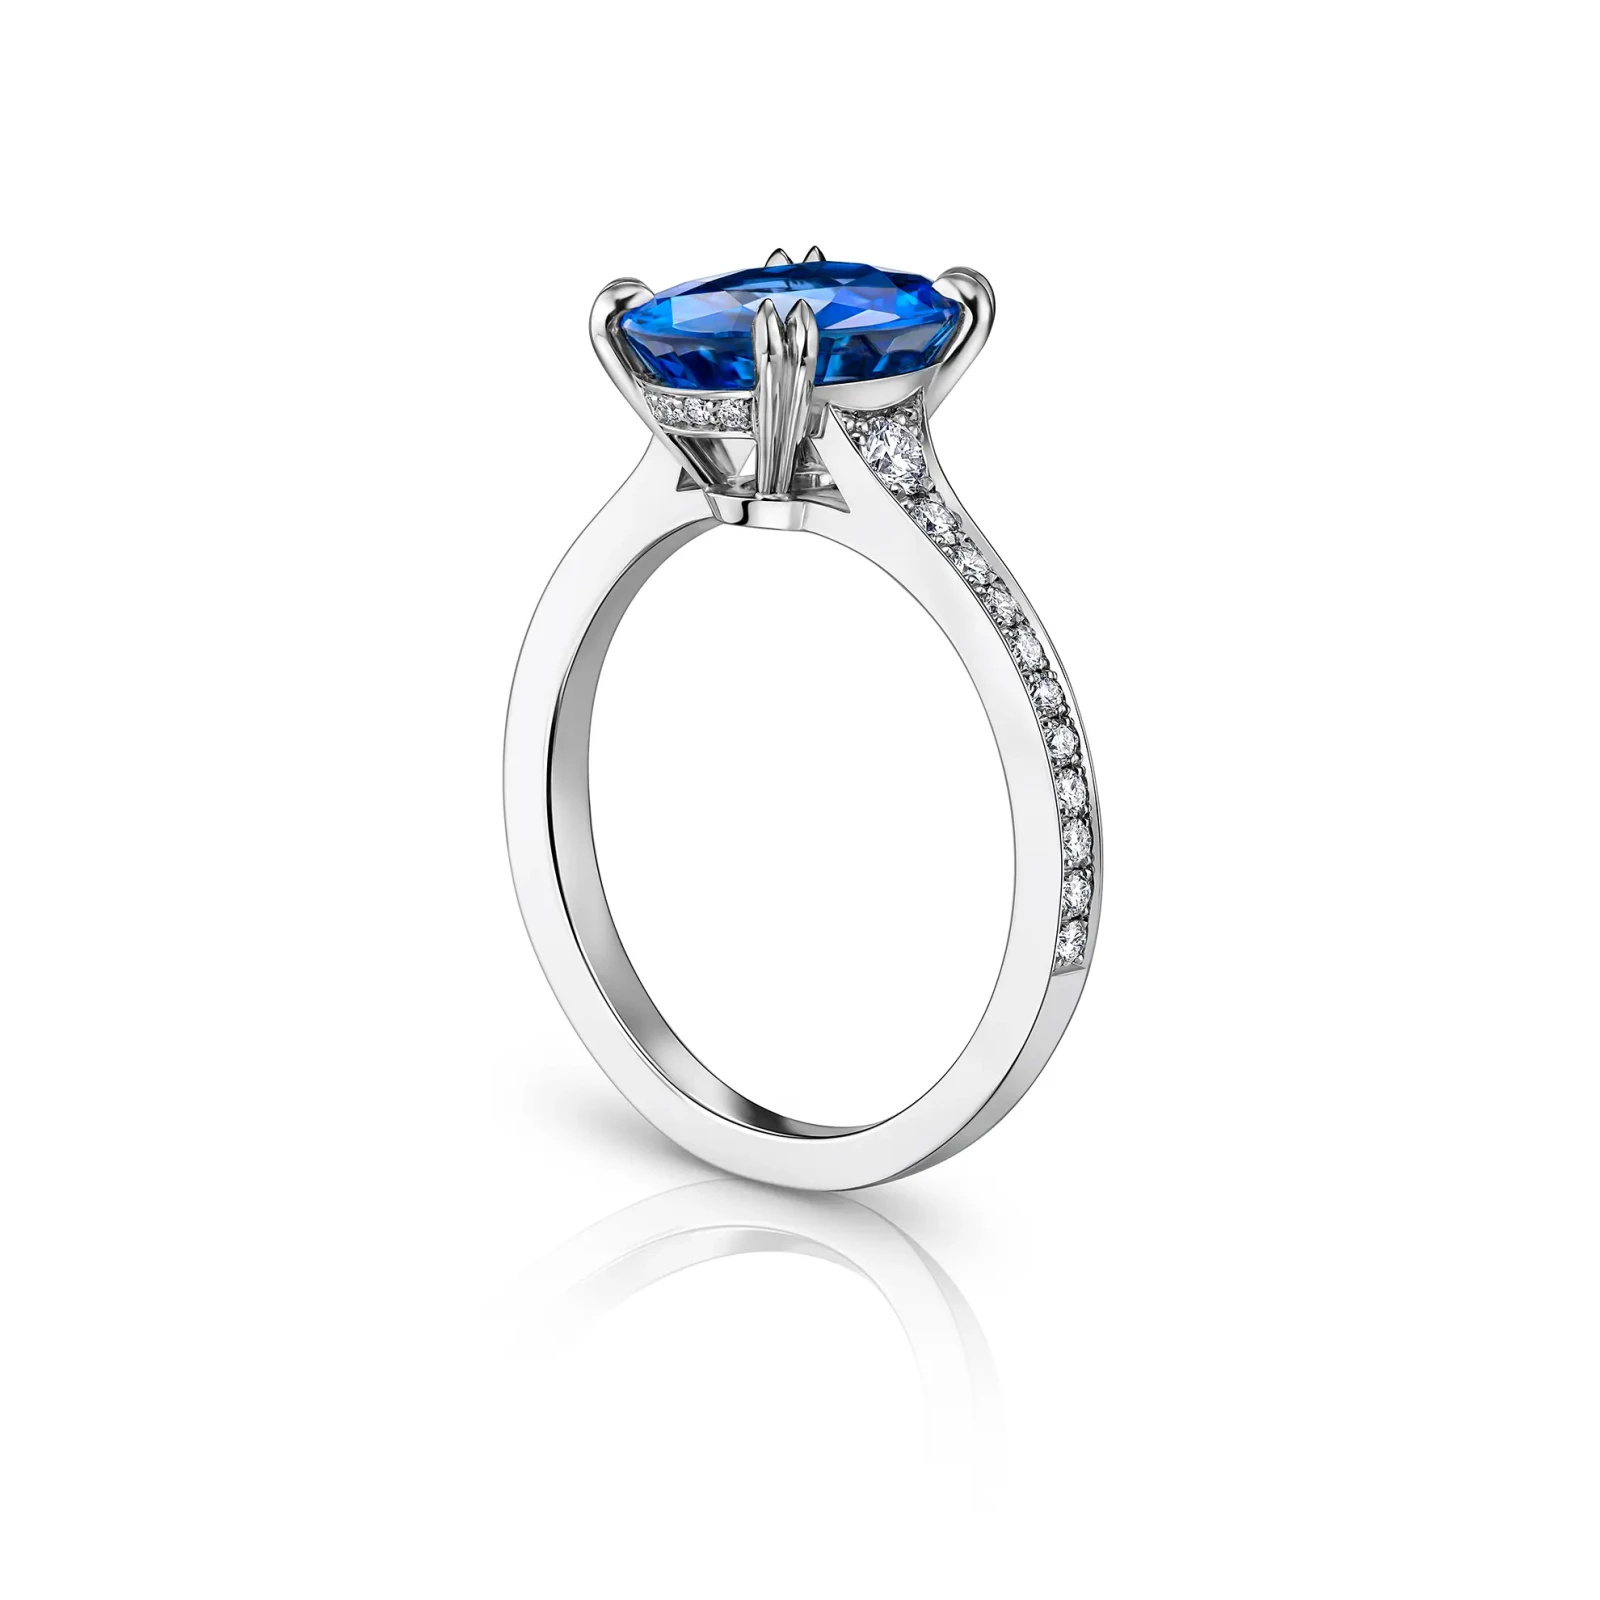 Oval Sapphire Engagement Ring with Diamond Set Shoulders and Bezel